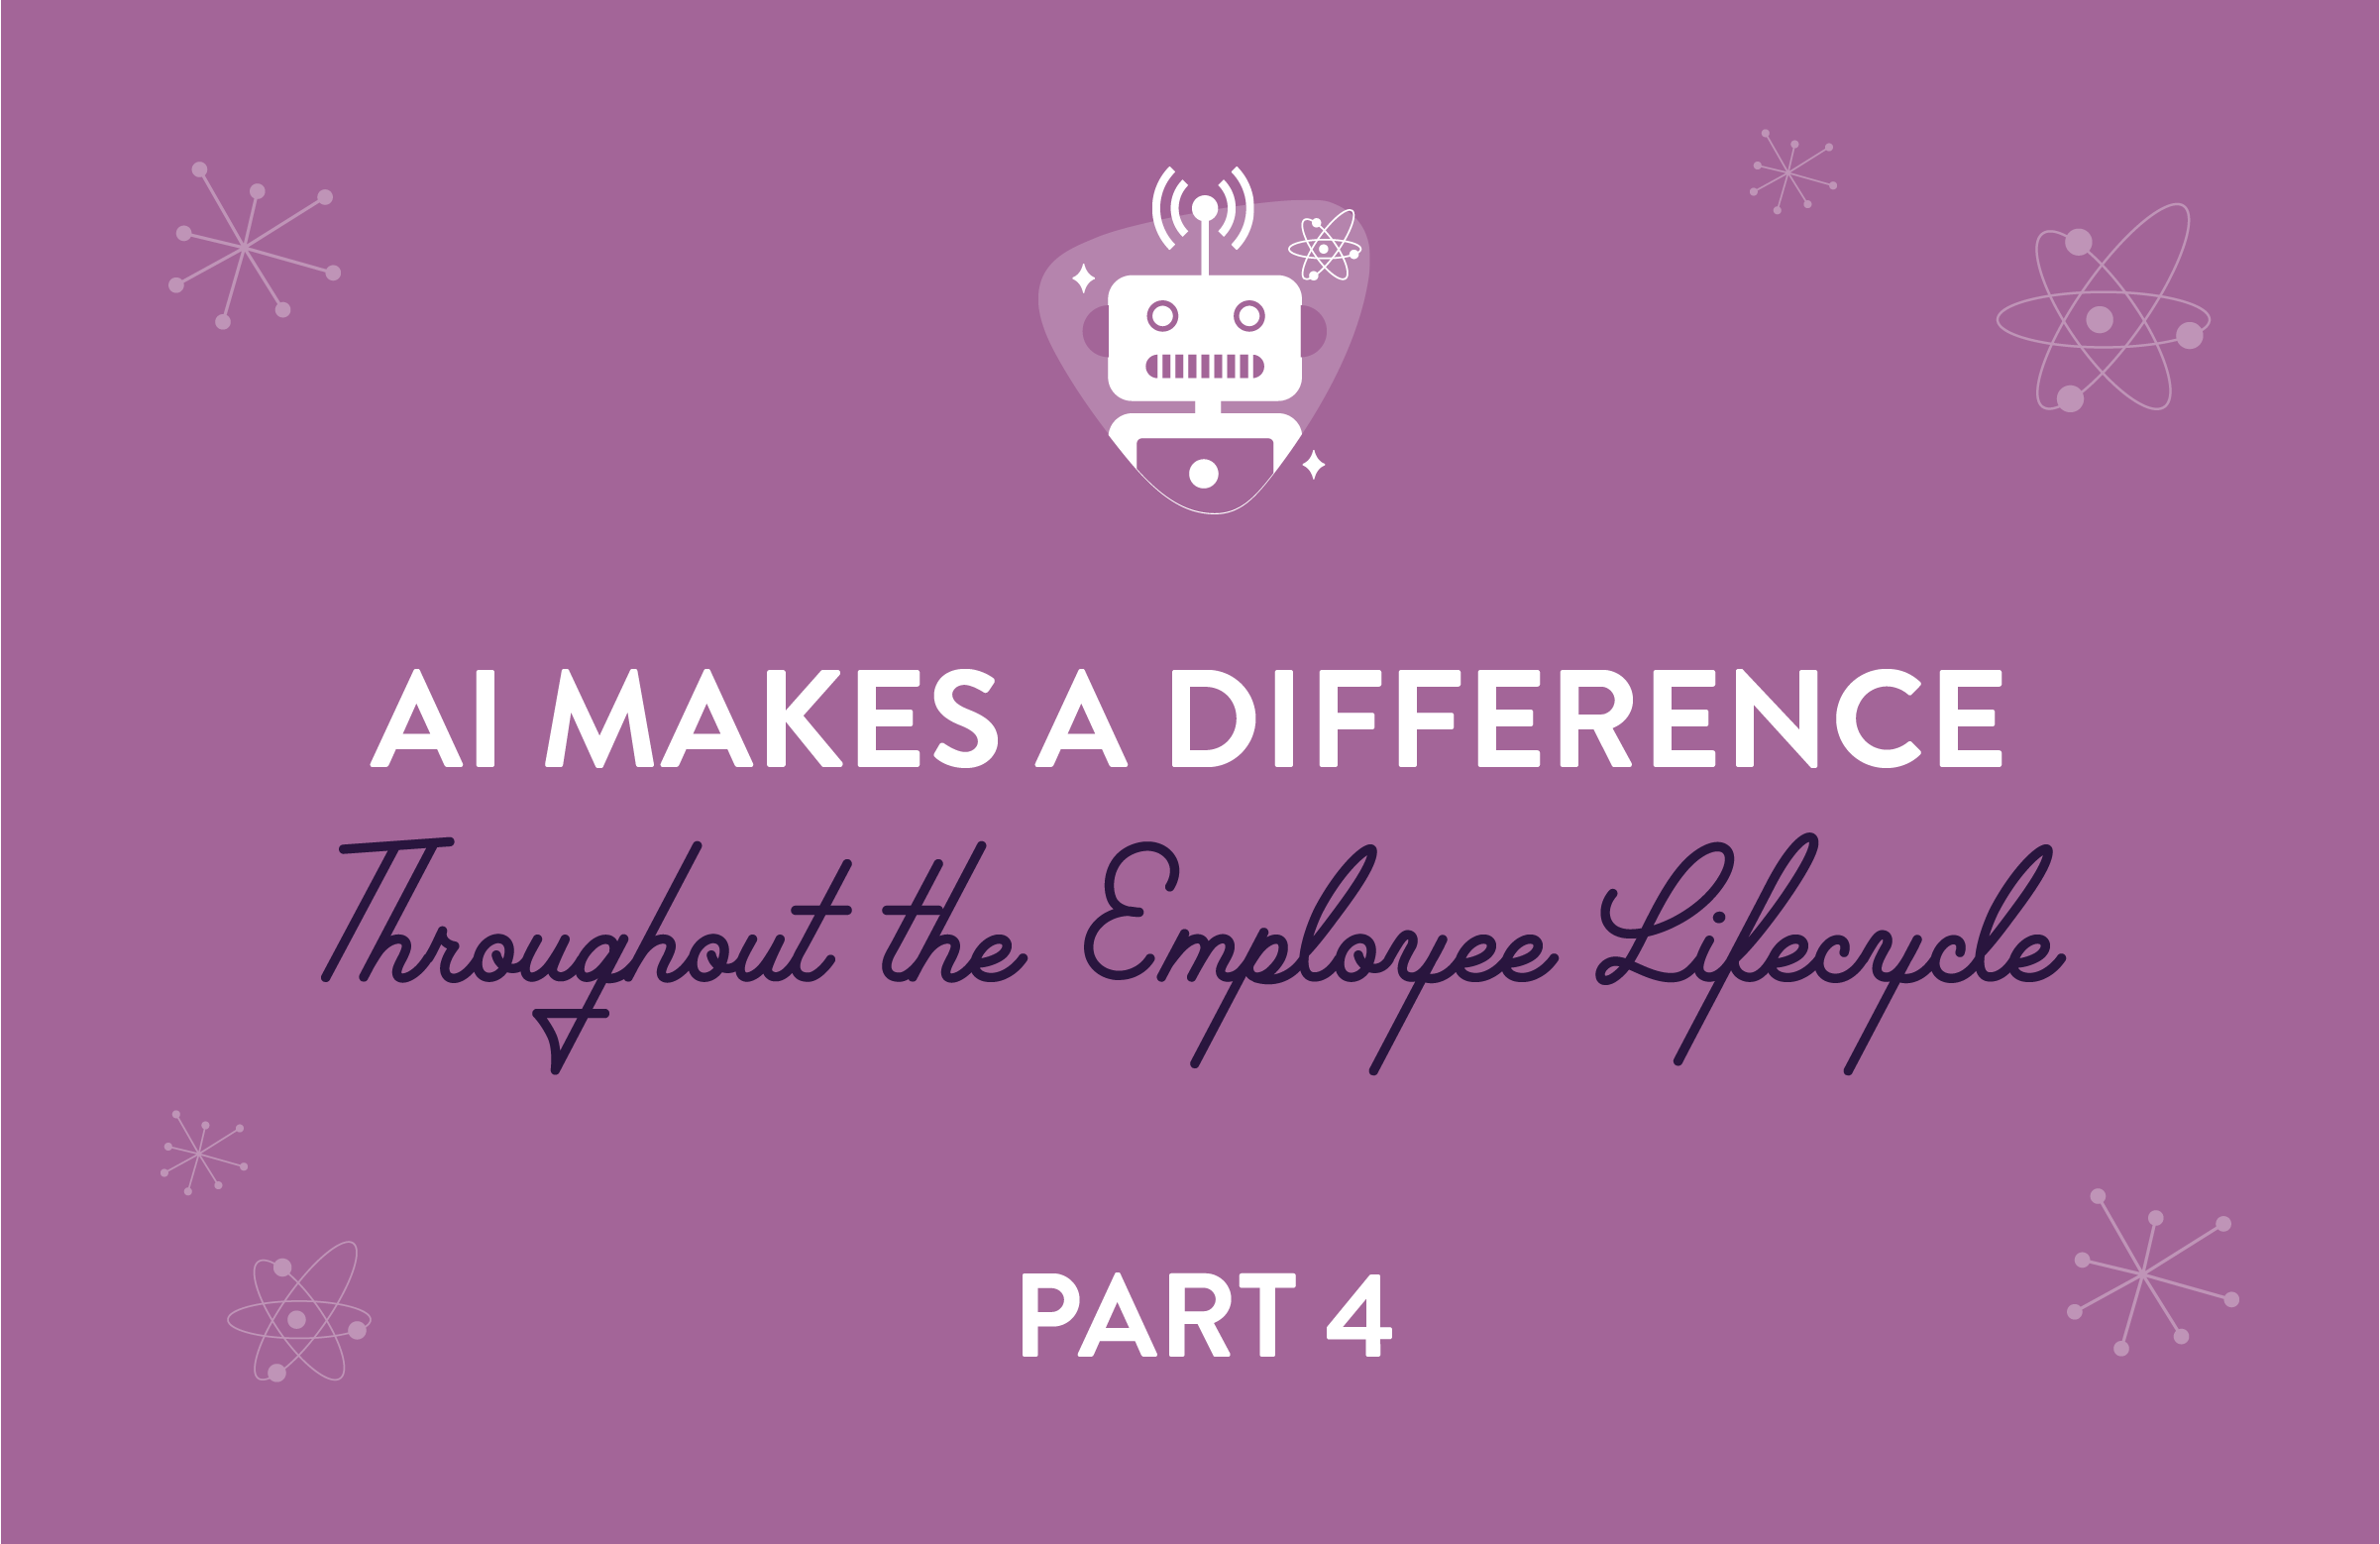 AI Makes a Difference Throughout the Employee Lifecycle